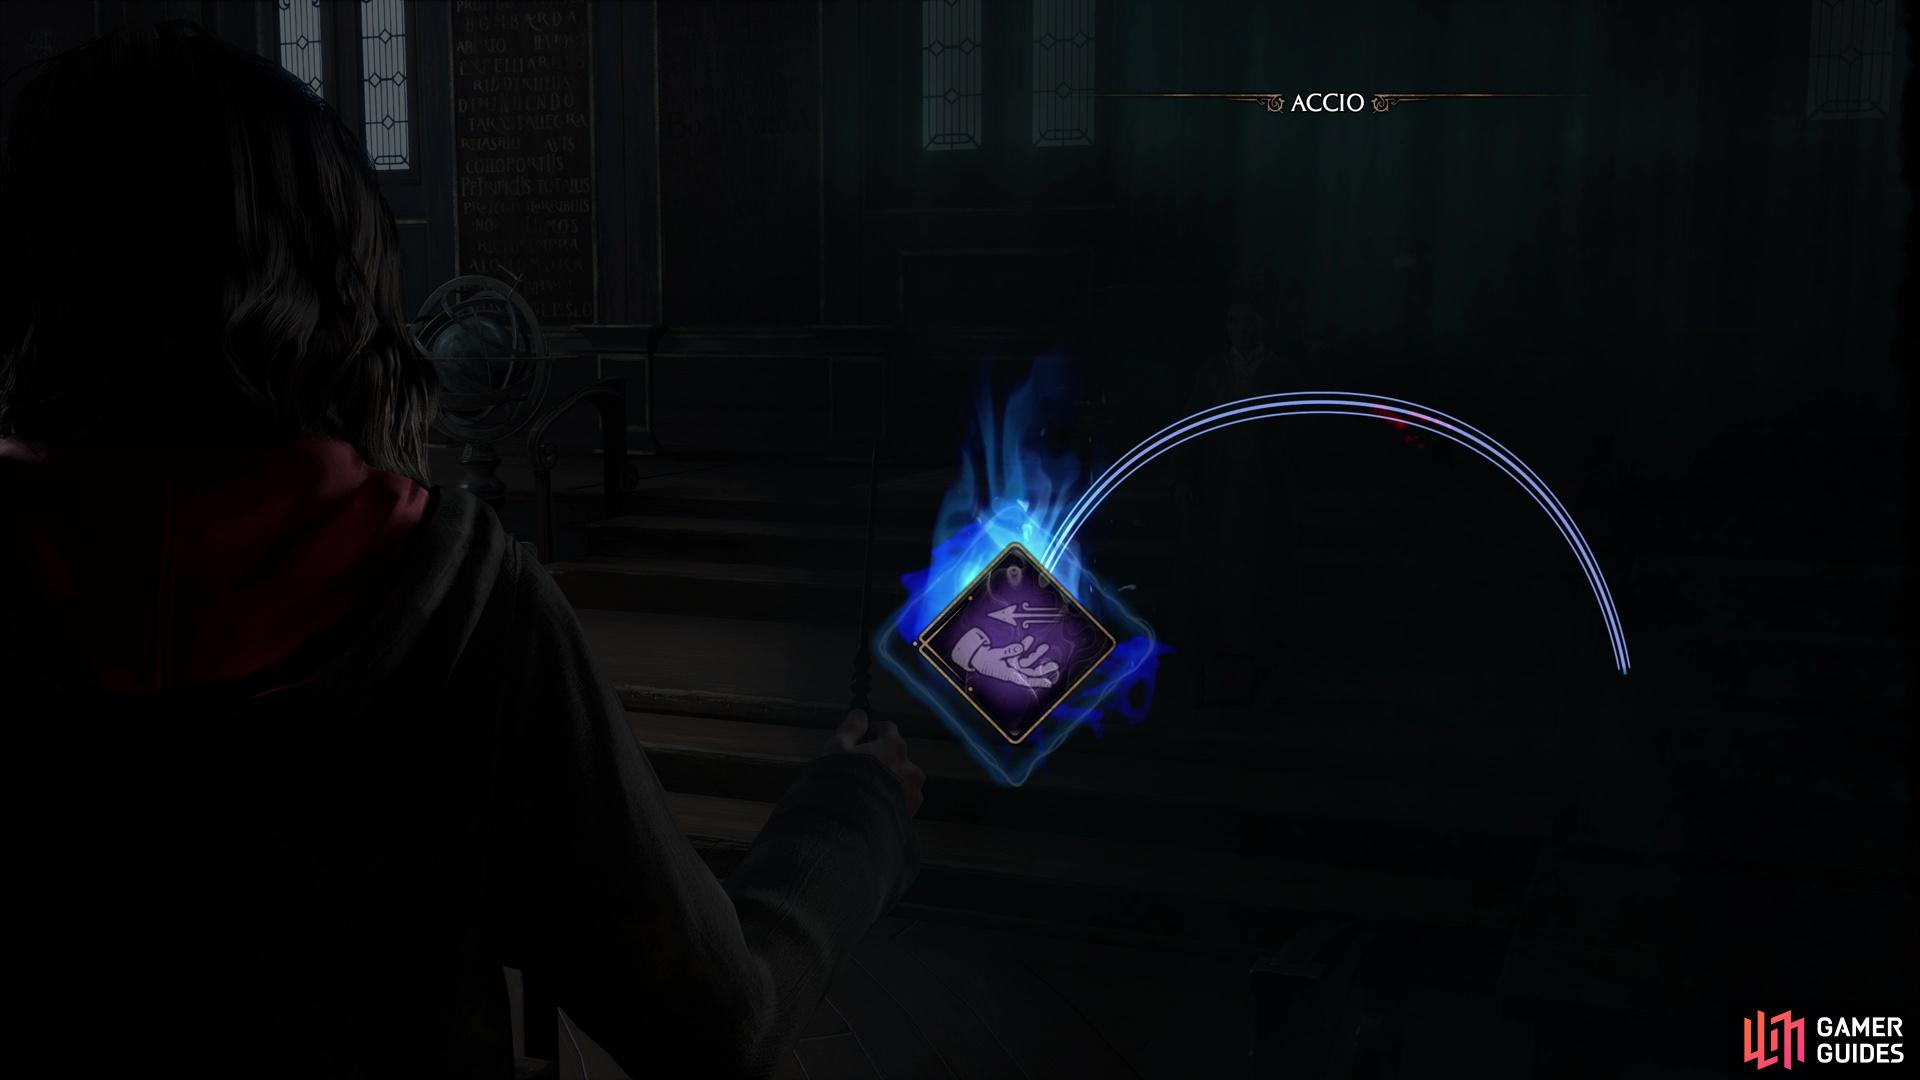 Accio is one of the first learnable Spells available to Witches and Wizards in Hogwarts Legacy. It allows them to pull object to their location.